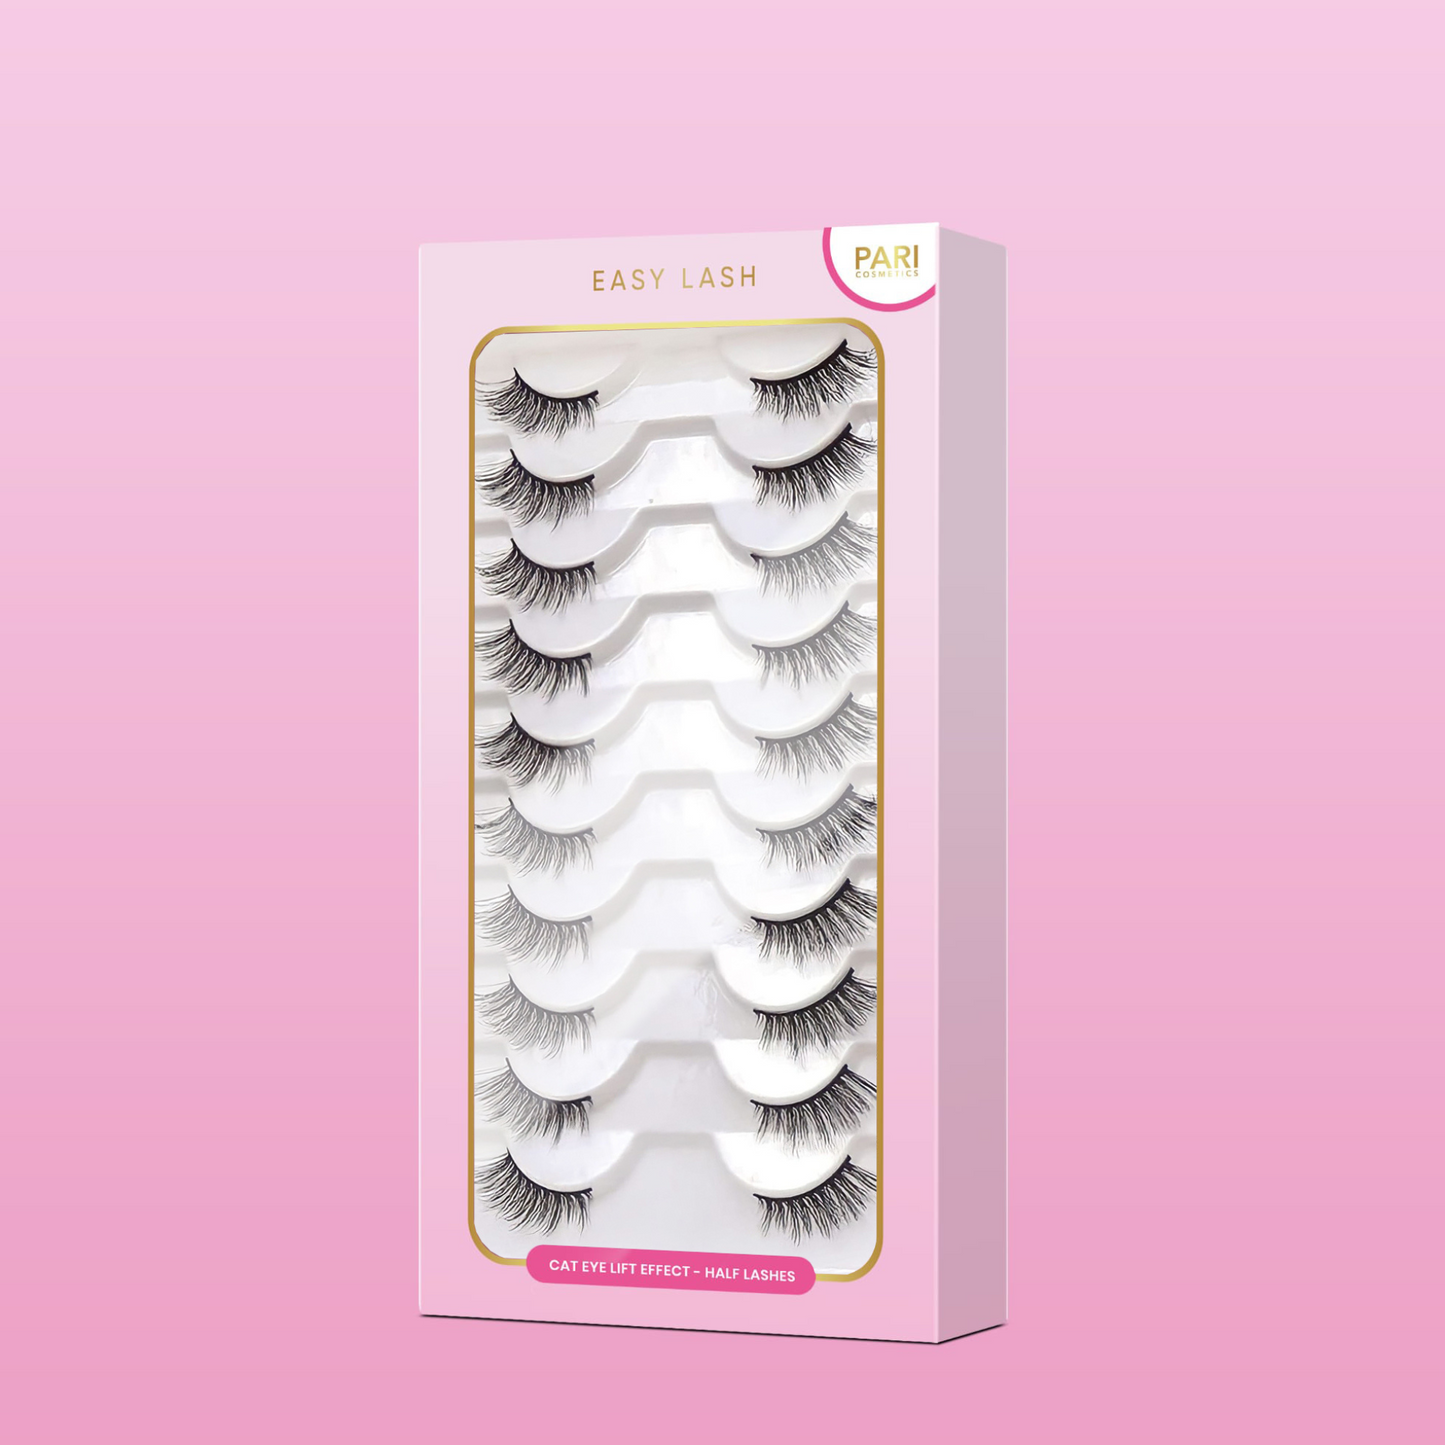 EASY LASH - Half Lashes 10 Pairs Reusable Natural Cateye - For all Eye Shape and sizes (Best Deal)